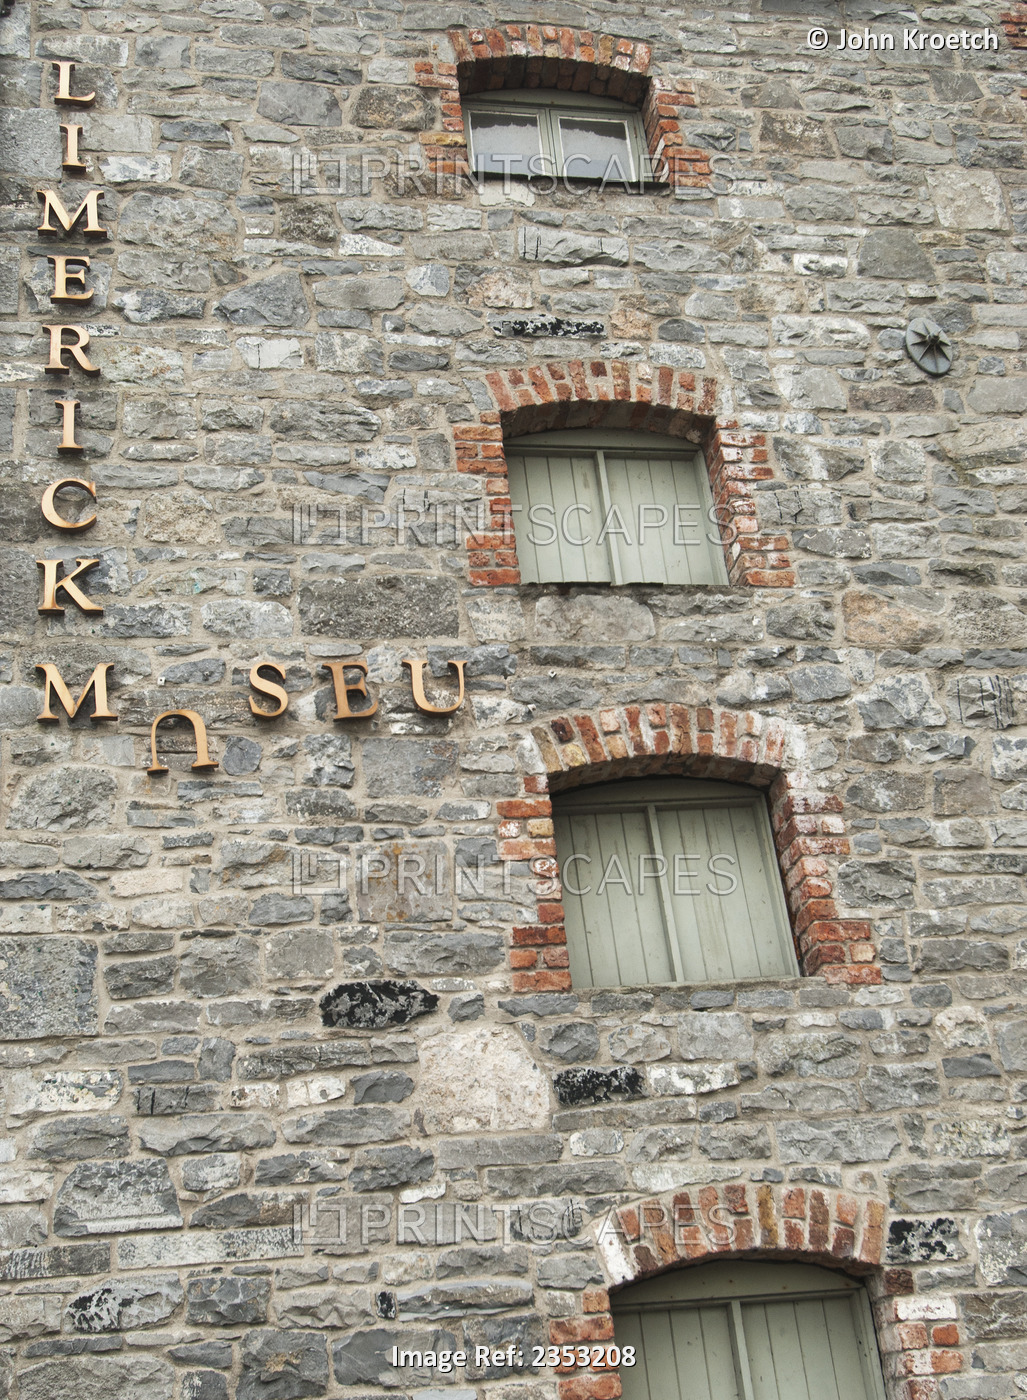 Broken Sign For Limerick Museum On The Side Of A Stone Building; Limerick, ...